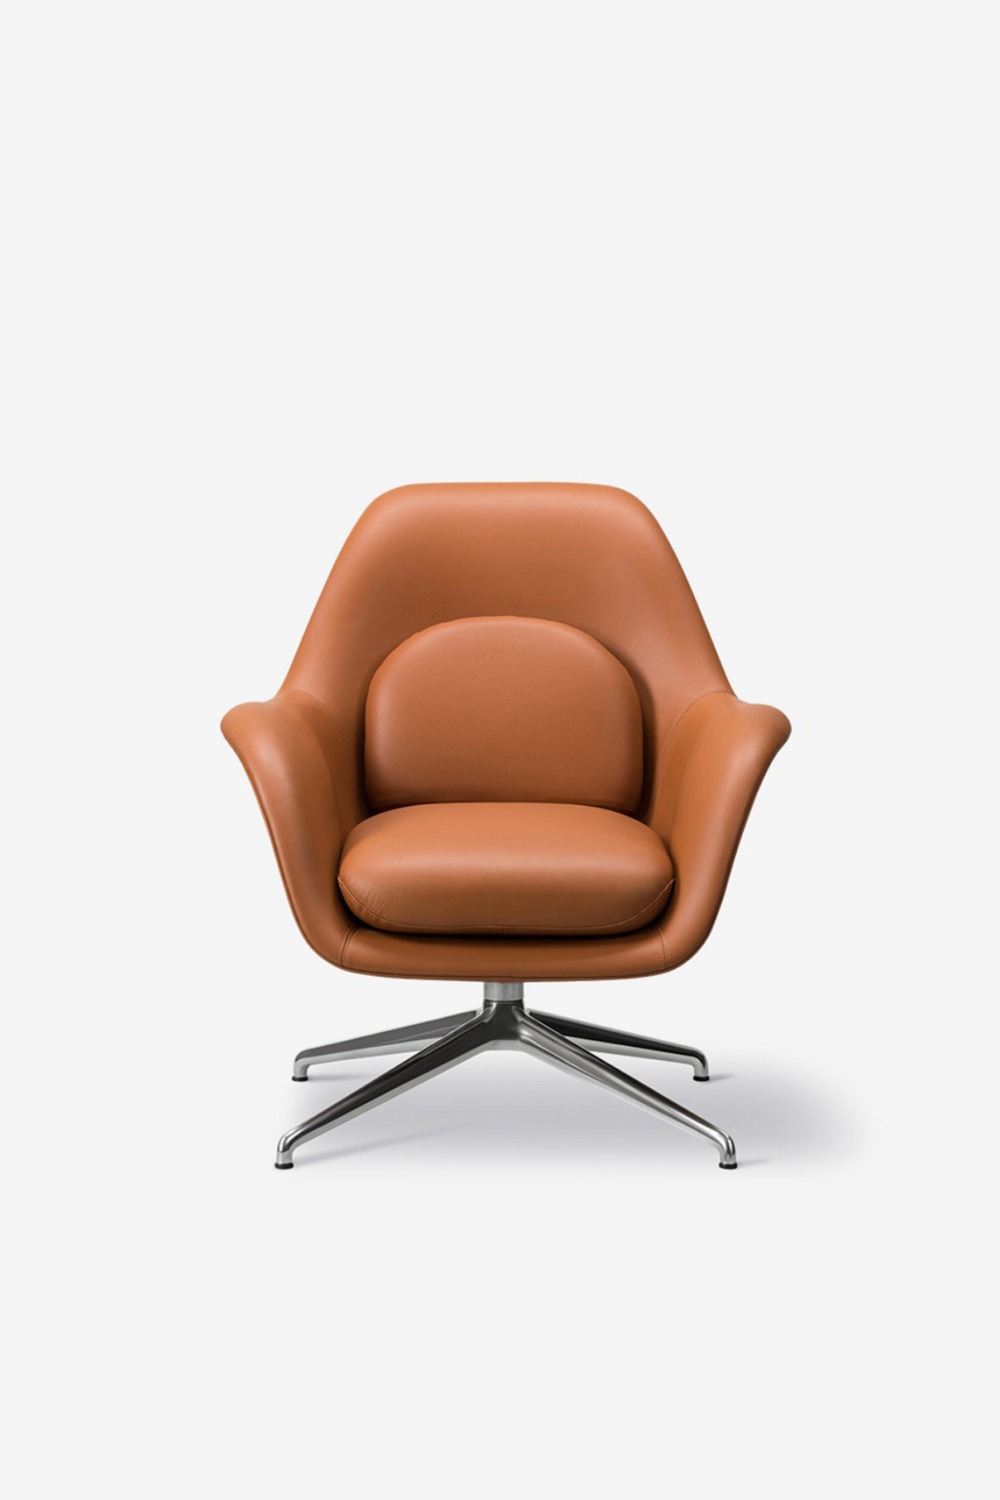 [Fredericia] Swoon Lounge chair  (Leather)